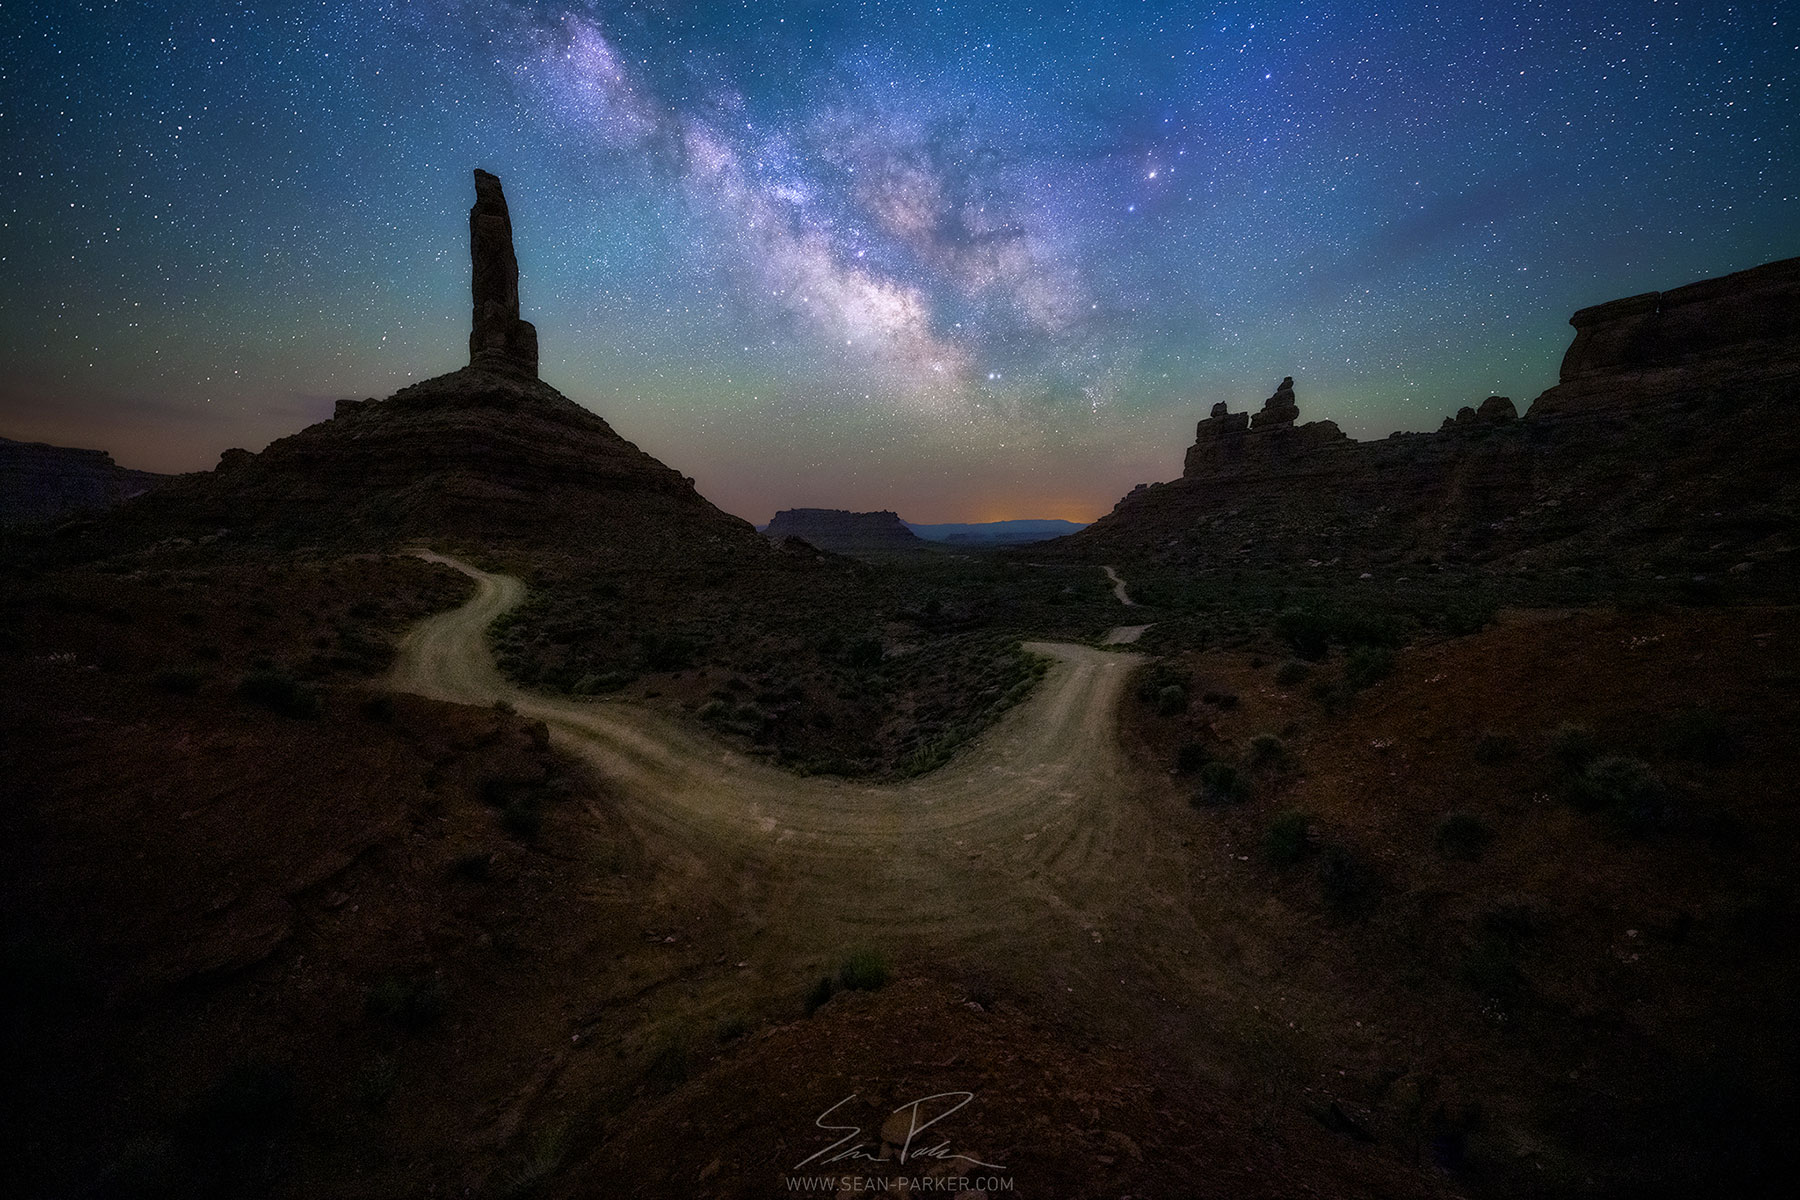 Valley of the Gods night photography by Sean Parker